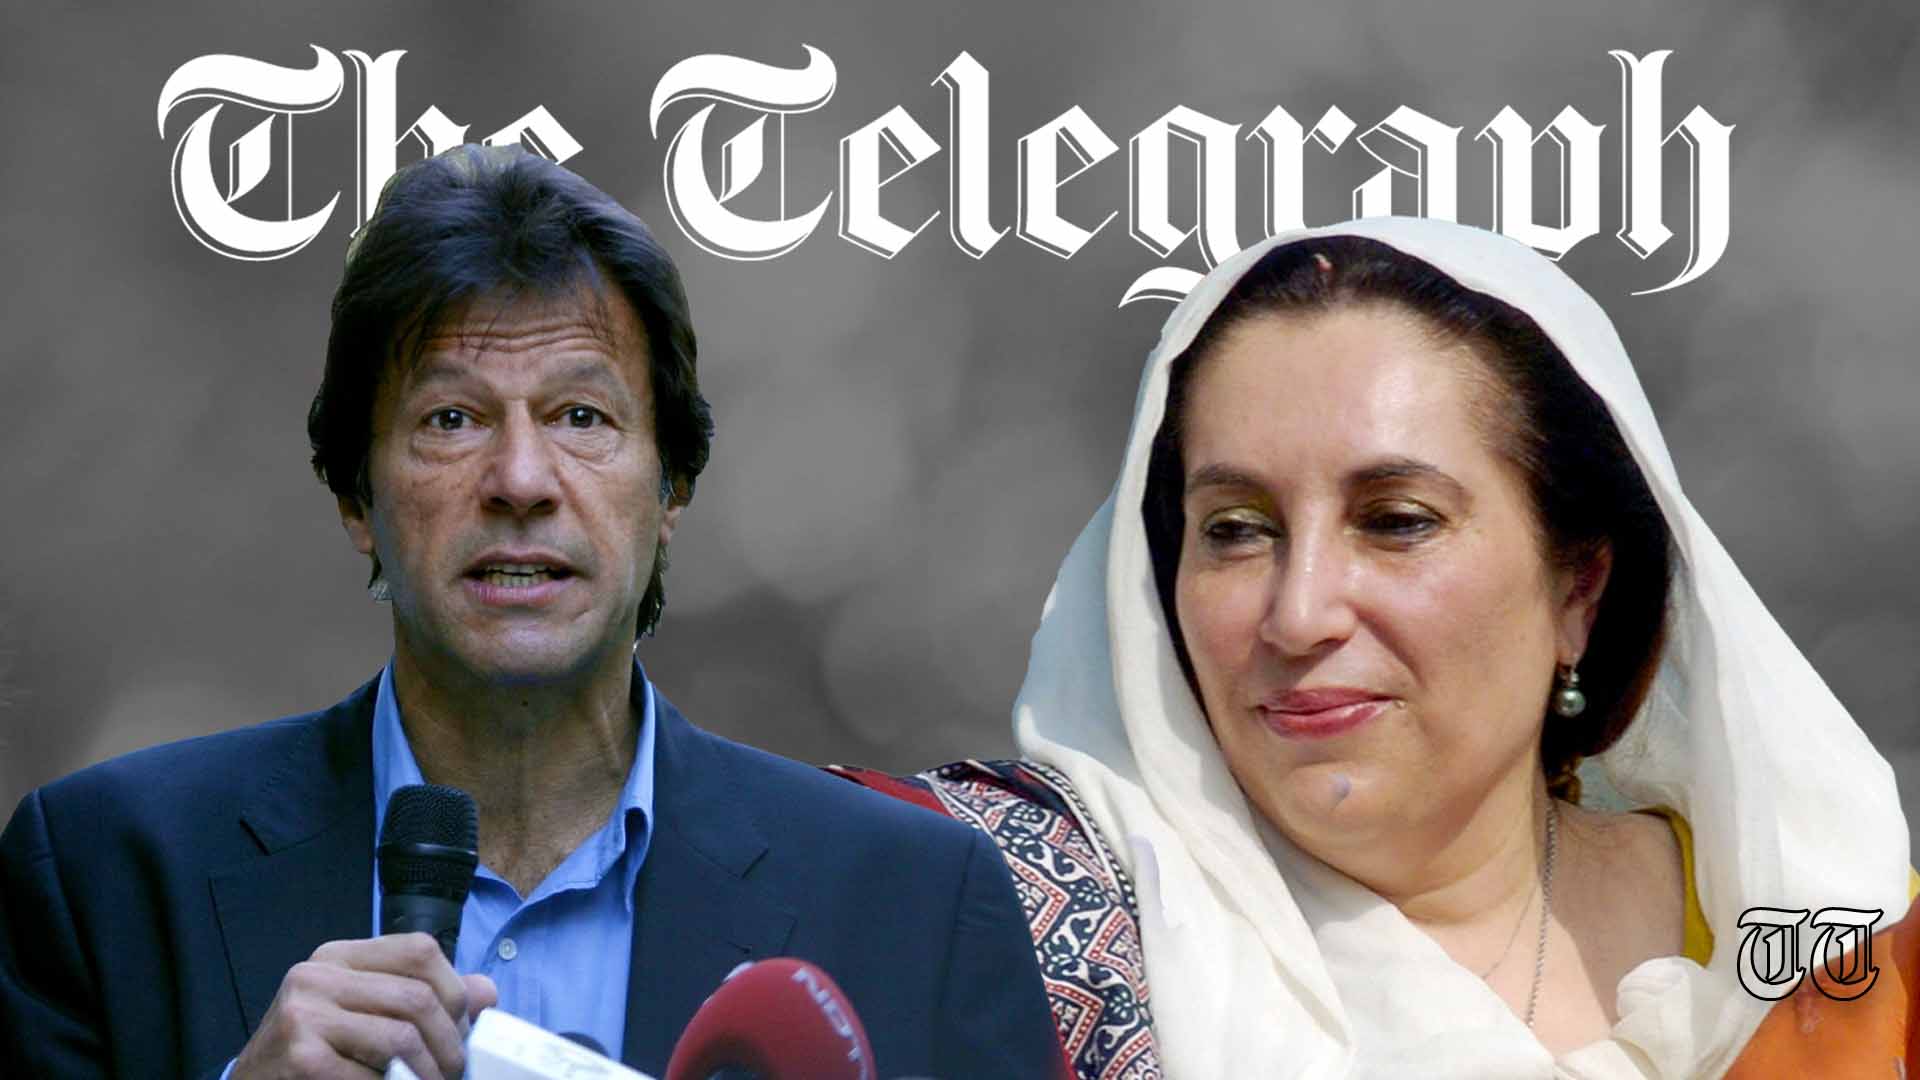 A combination file photo shows PTI chairman Imran Khan at Mumbai in 2007, and former prime minister Benazir Bhutto at Karachi in 2007. — FILE/THE THURSDAY TIMES